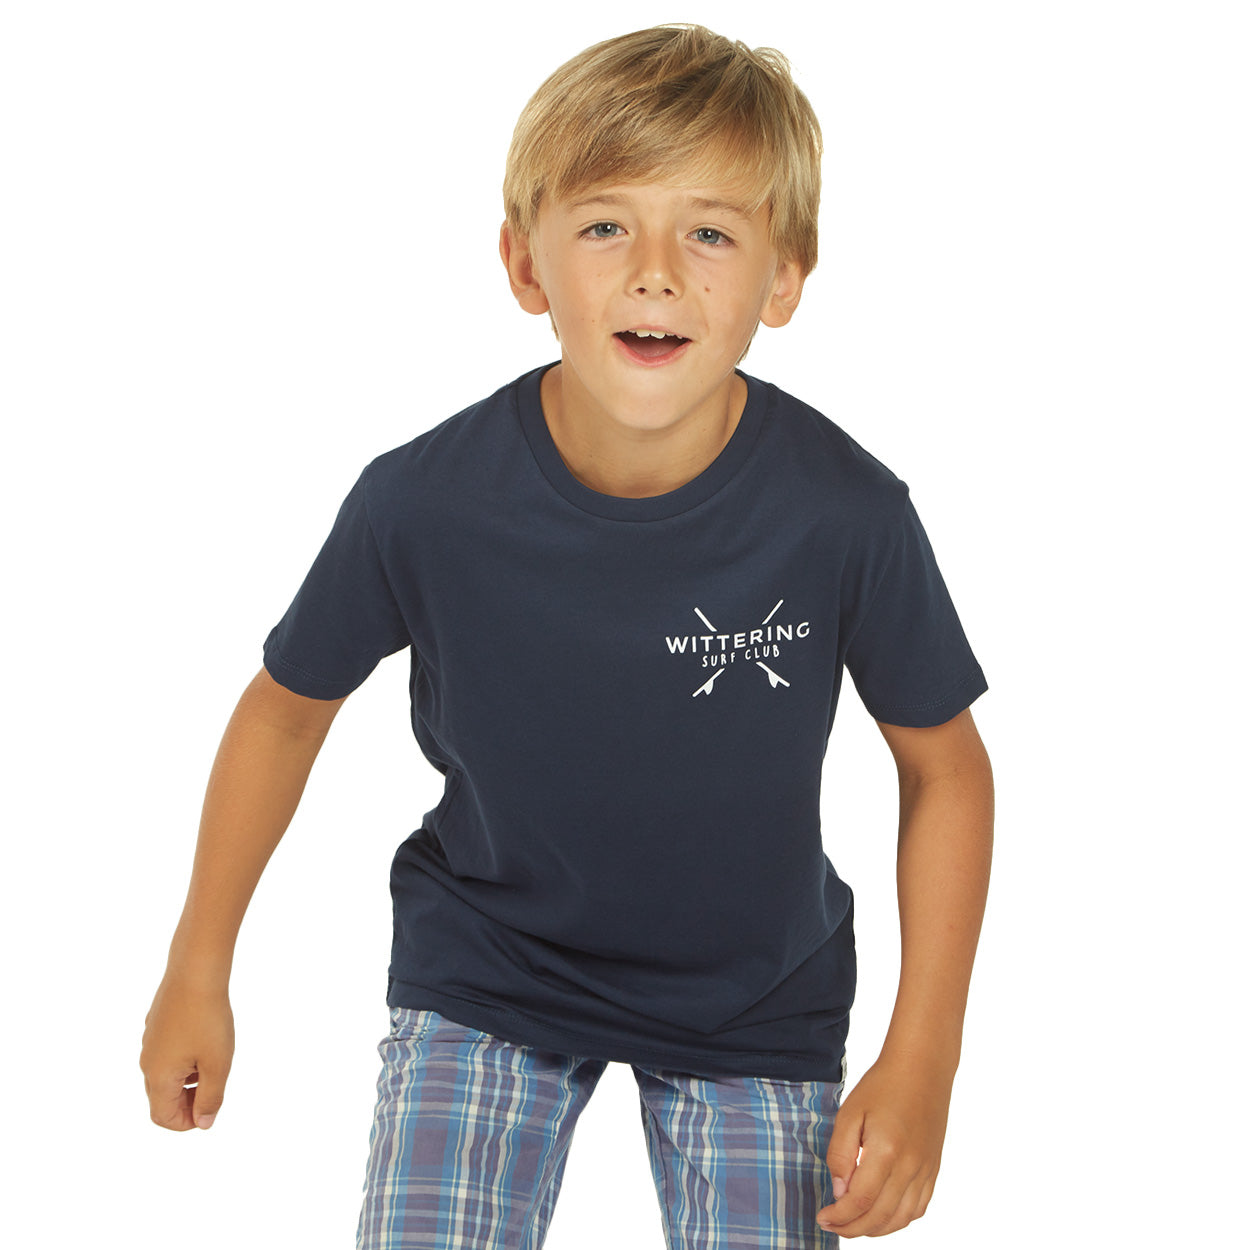 KIDS EVERYDAY SURF CLUB T-SHIRT - NAVY BLUE - Wittering Surf Shop